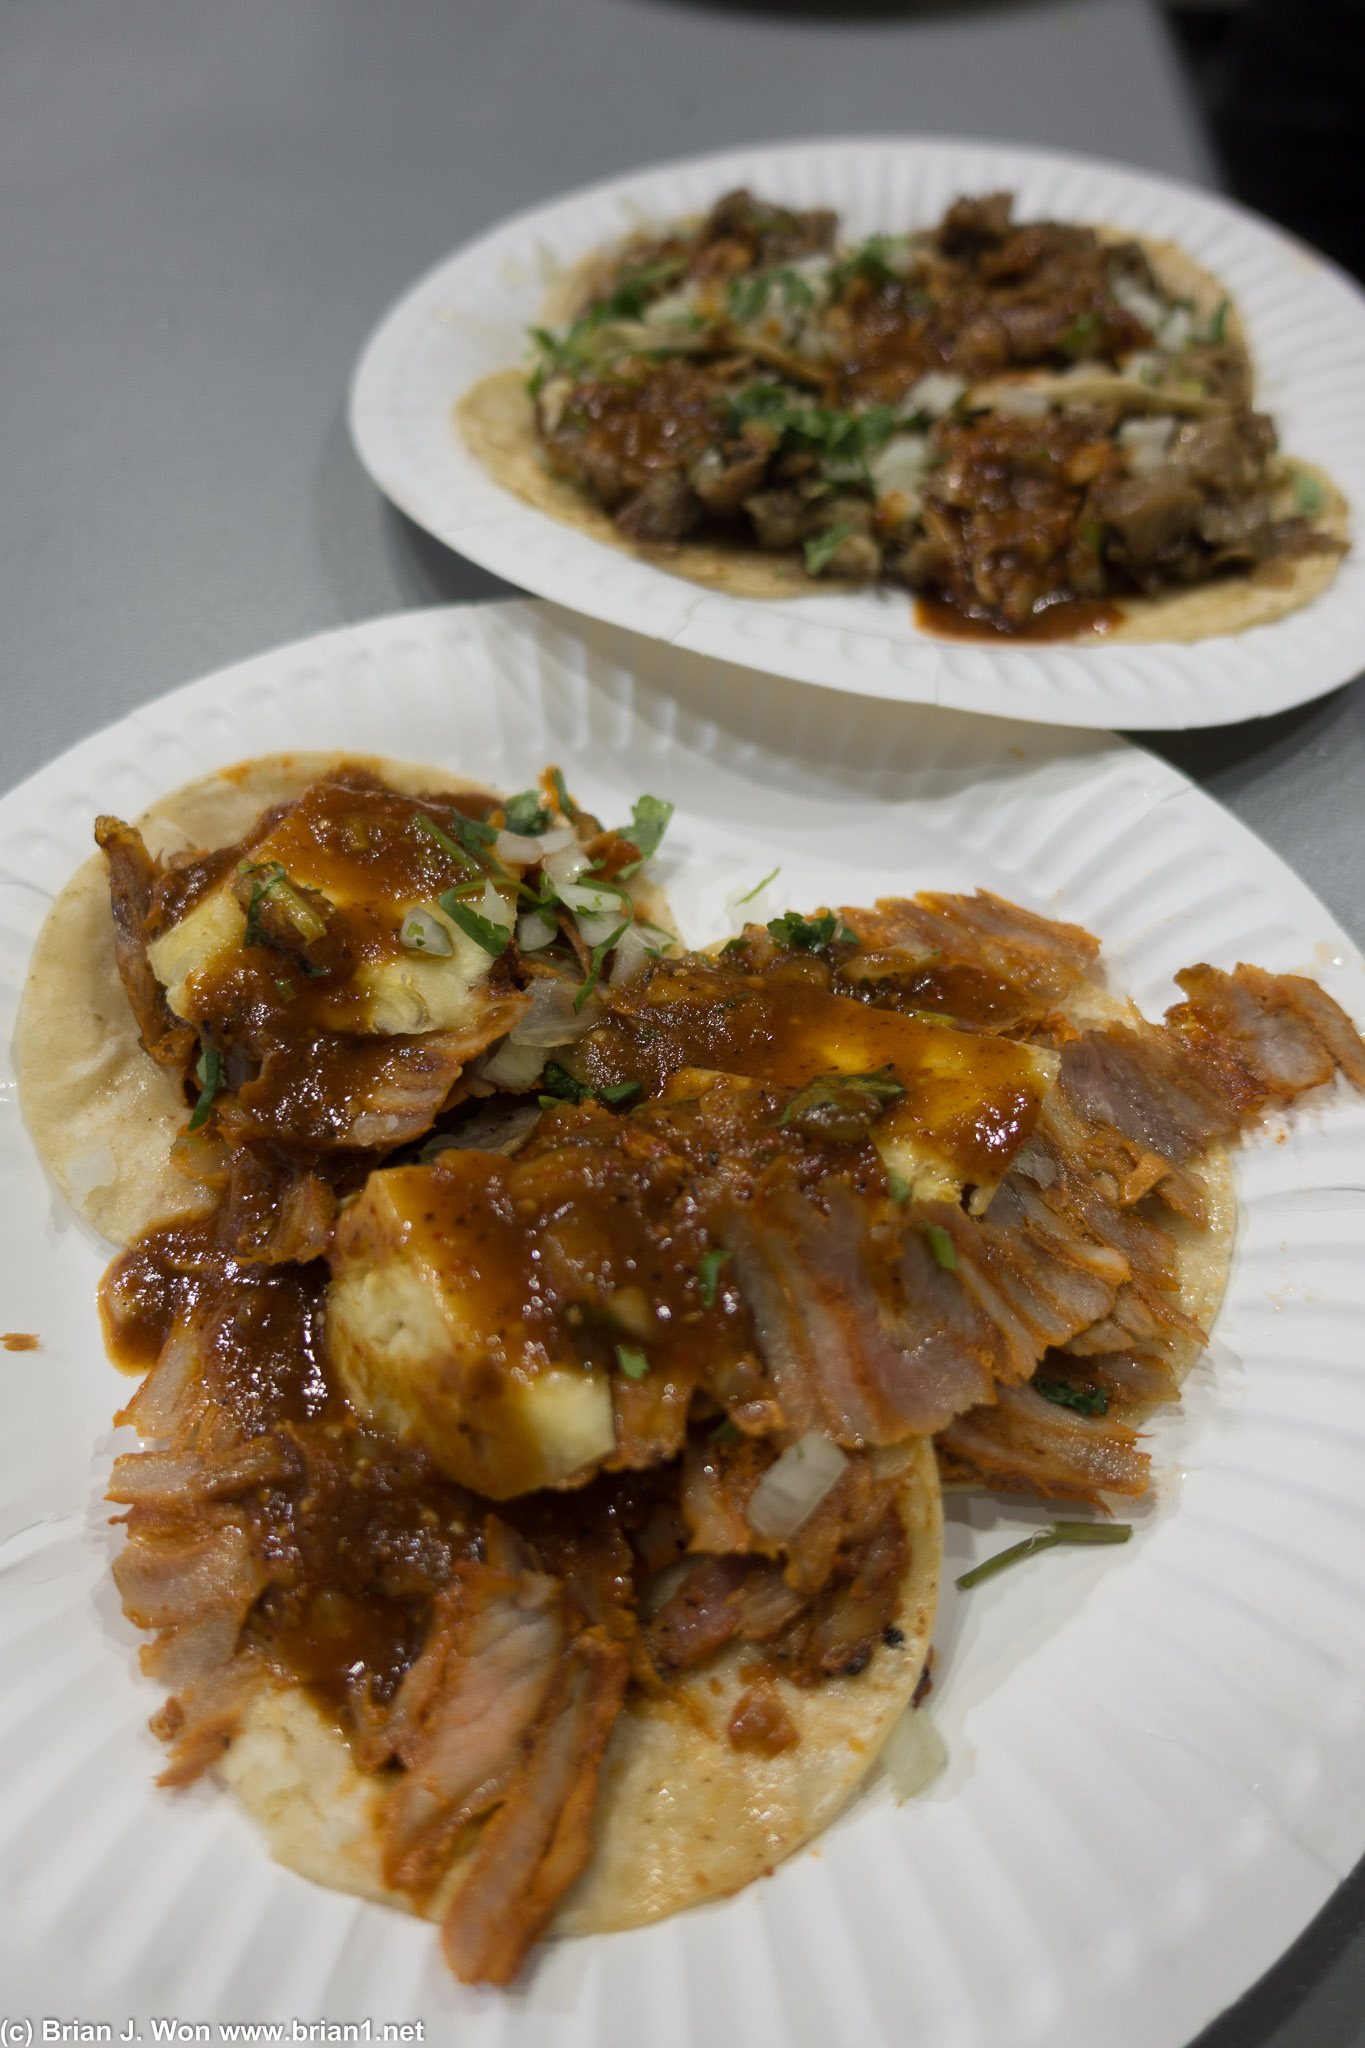 Al pastor was not quite as mind-blowing as Tuesday.